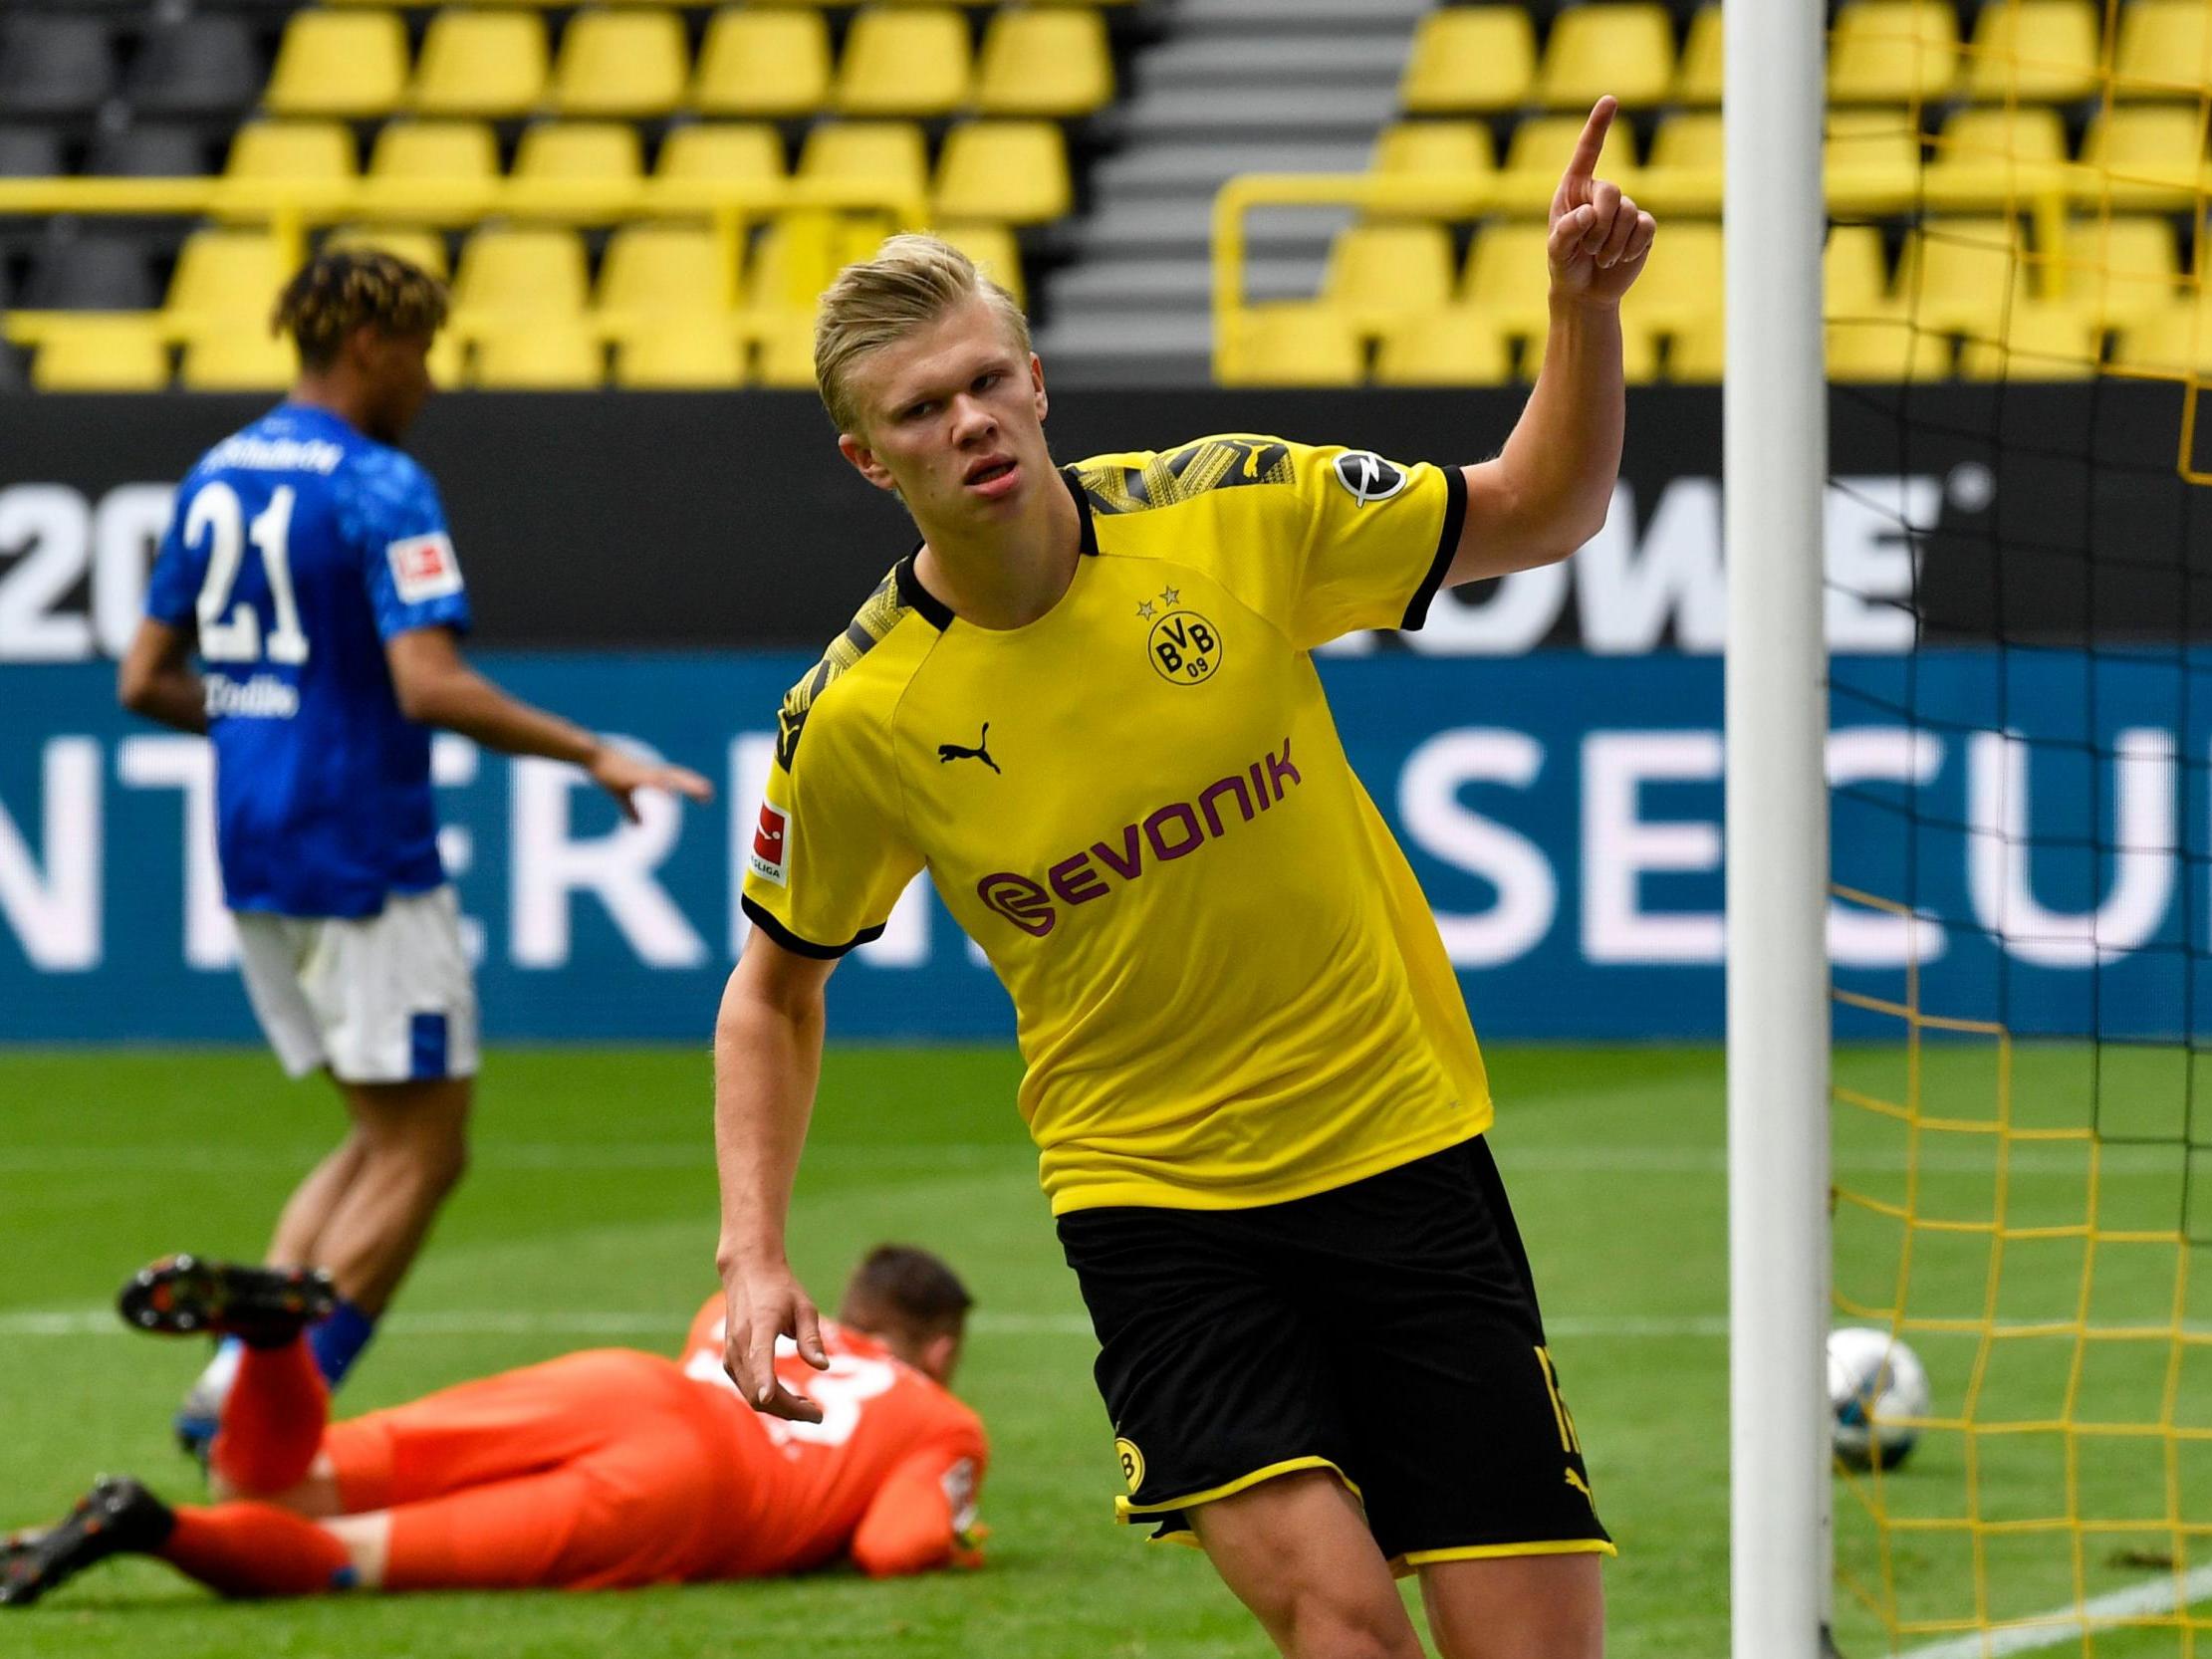 Erling Haaland: Former manager tells Dortmund star to choose Liverpool as his next club